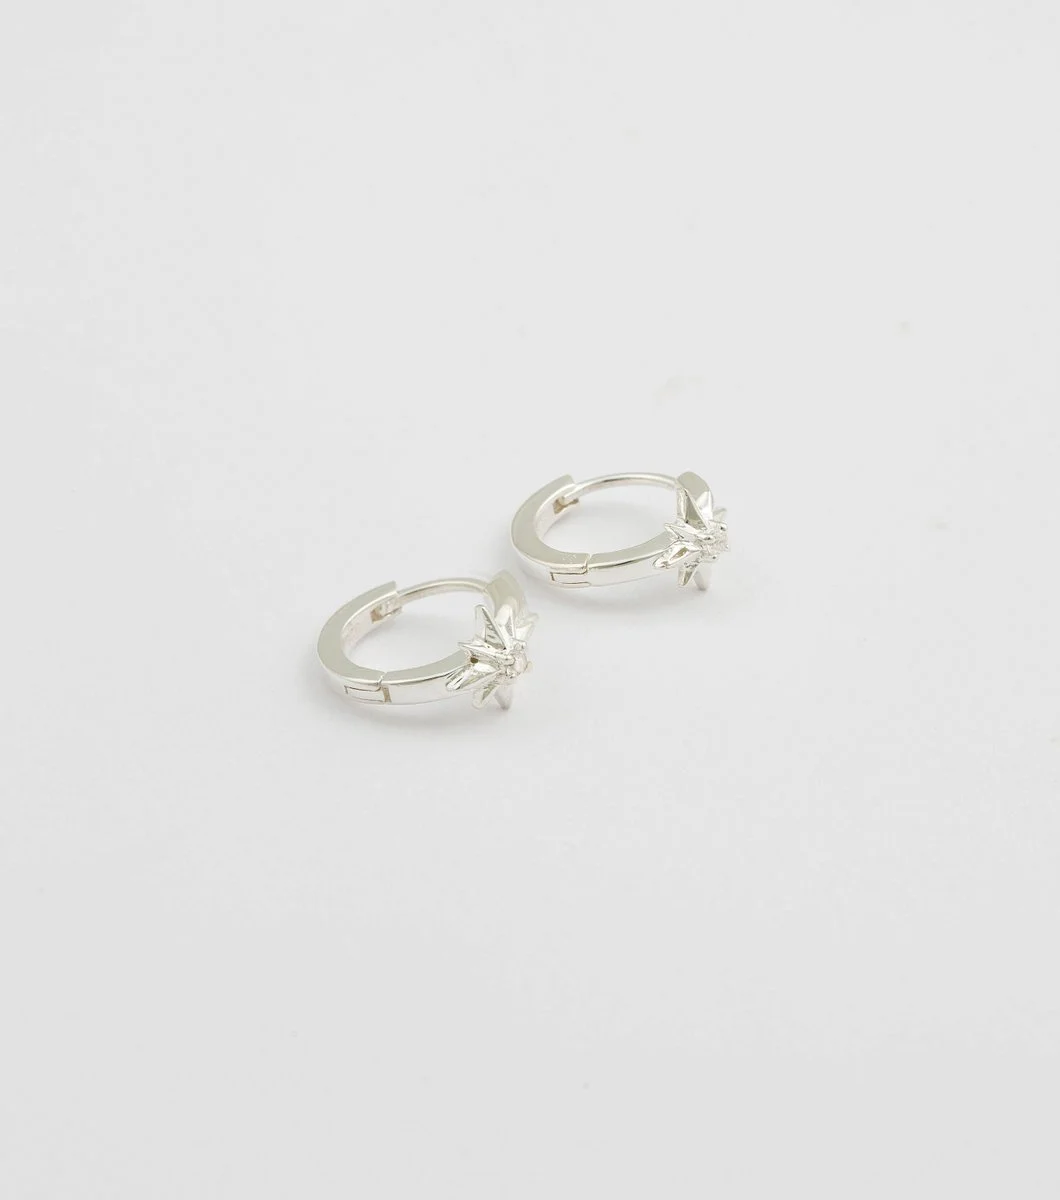 North Star Hoop Earrings Silver Syster P